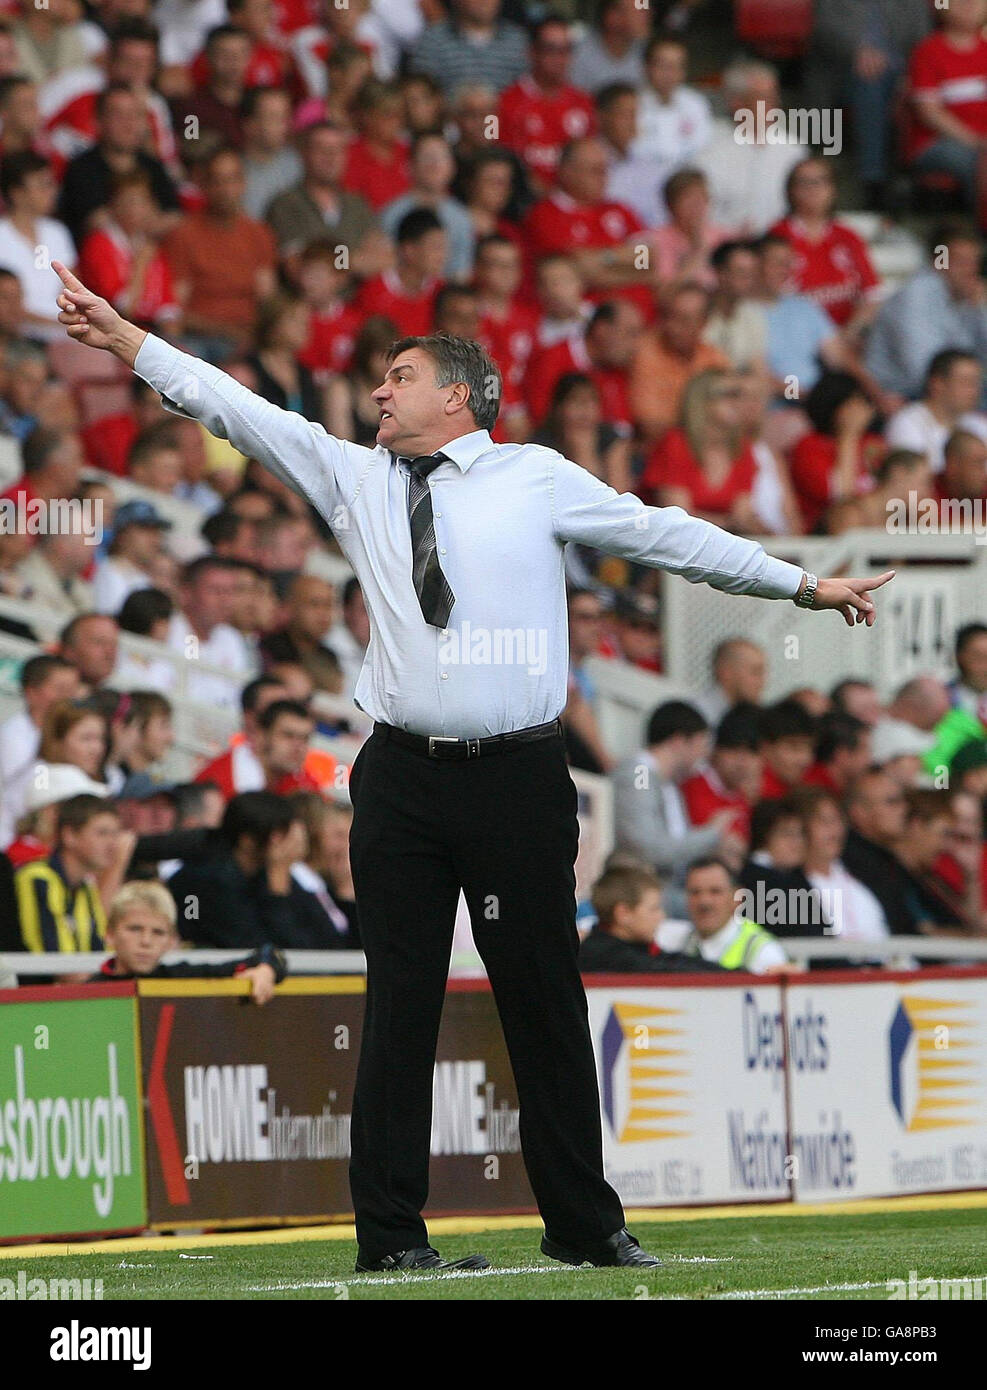 Soccer - Barclays Premier League - Middlesbrough v Newcastle United - Riverside Stadium. Newcastle manager Sam Allardyce on the touchline during the Barclays Premier League match at Riverside Stadium, Middlesbrough. Stock Photo